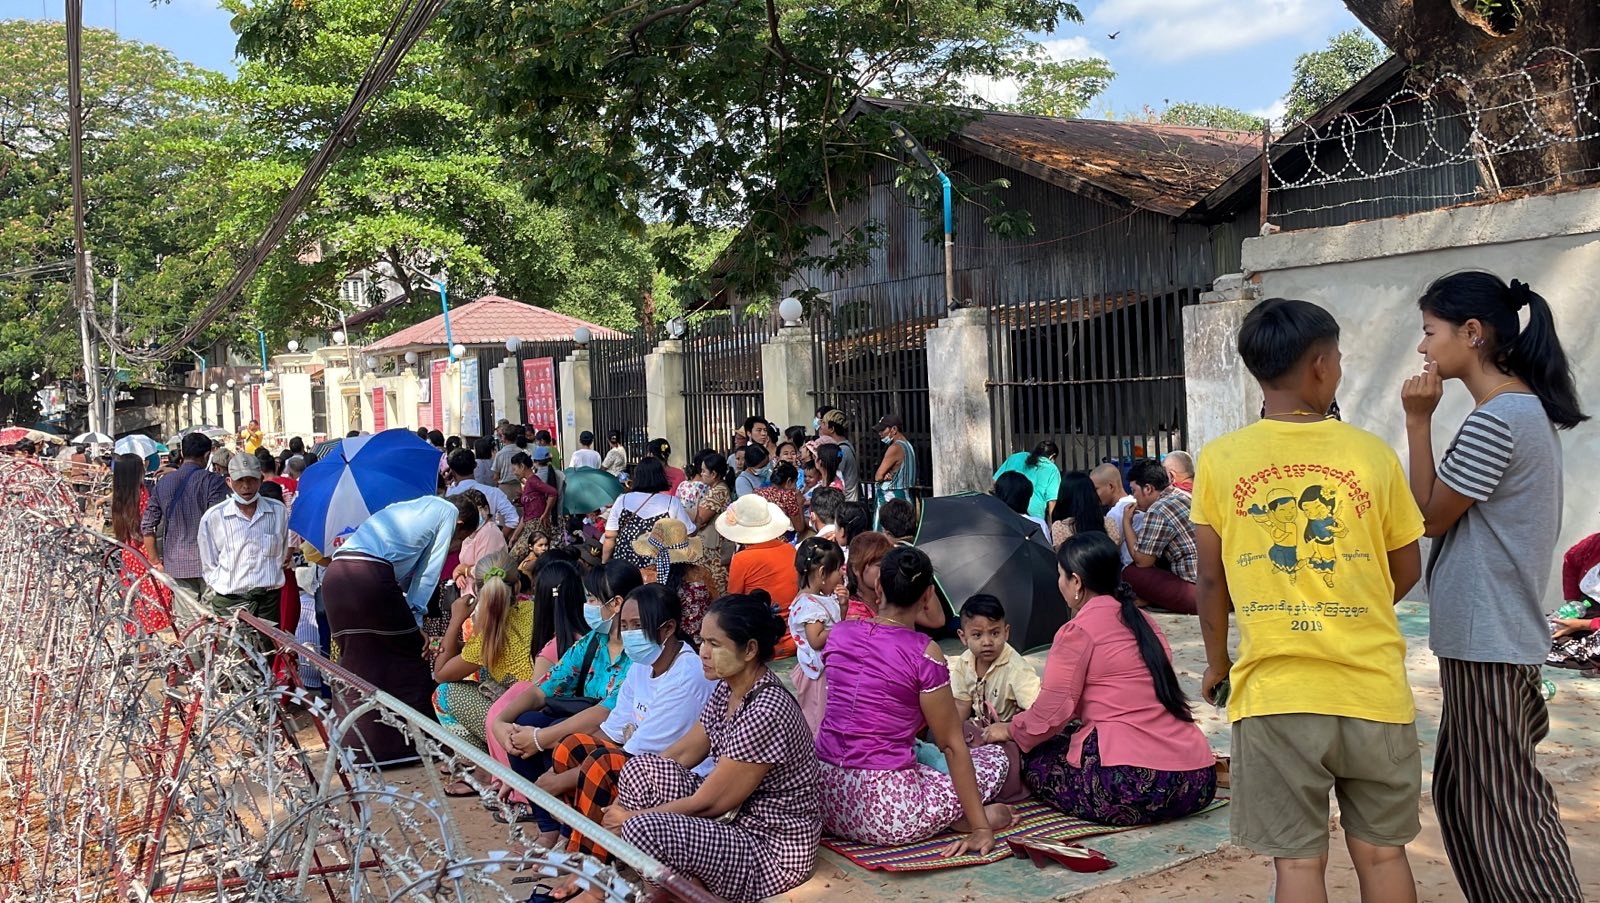 People wait at Insein prison in hopes of the release of their families members who were arrested due to the anti-coup protests, in Yangon